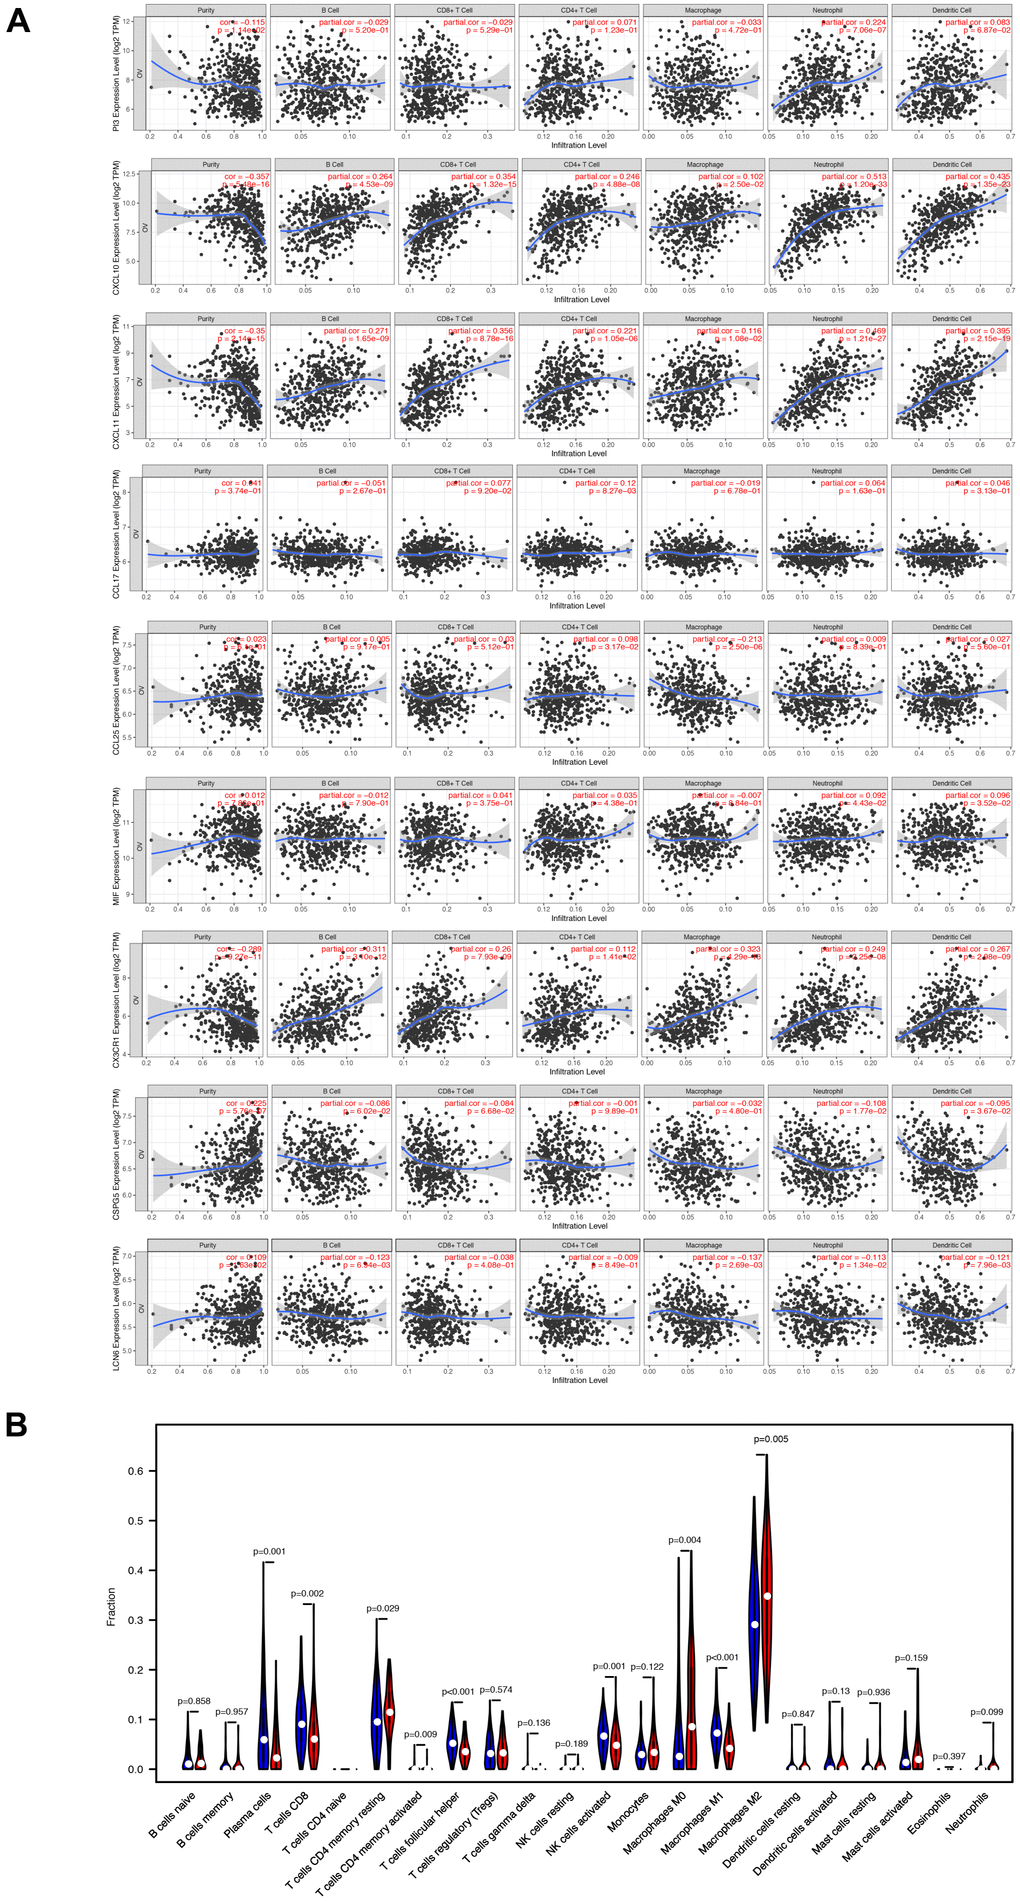 The varied proportions of immune cells based on 9 immune-related prognostic signatures. (A) The correlations of 9 signatures and 6 subtypes of immune cells. (B) The relative percentage of 22 subtypes of immune cells in high-risk and low-risk groups.